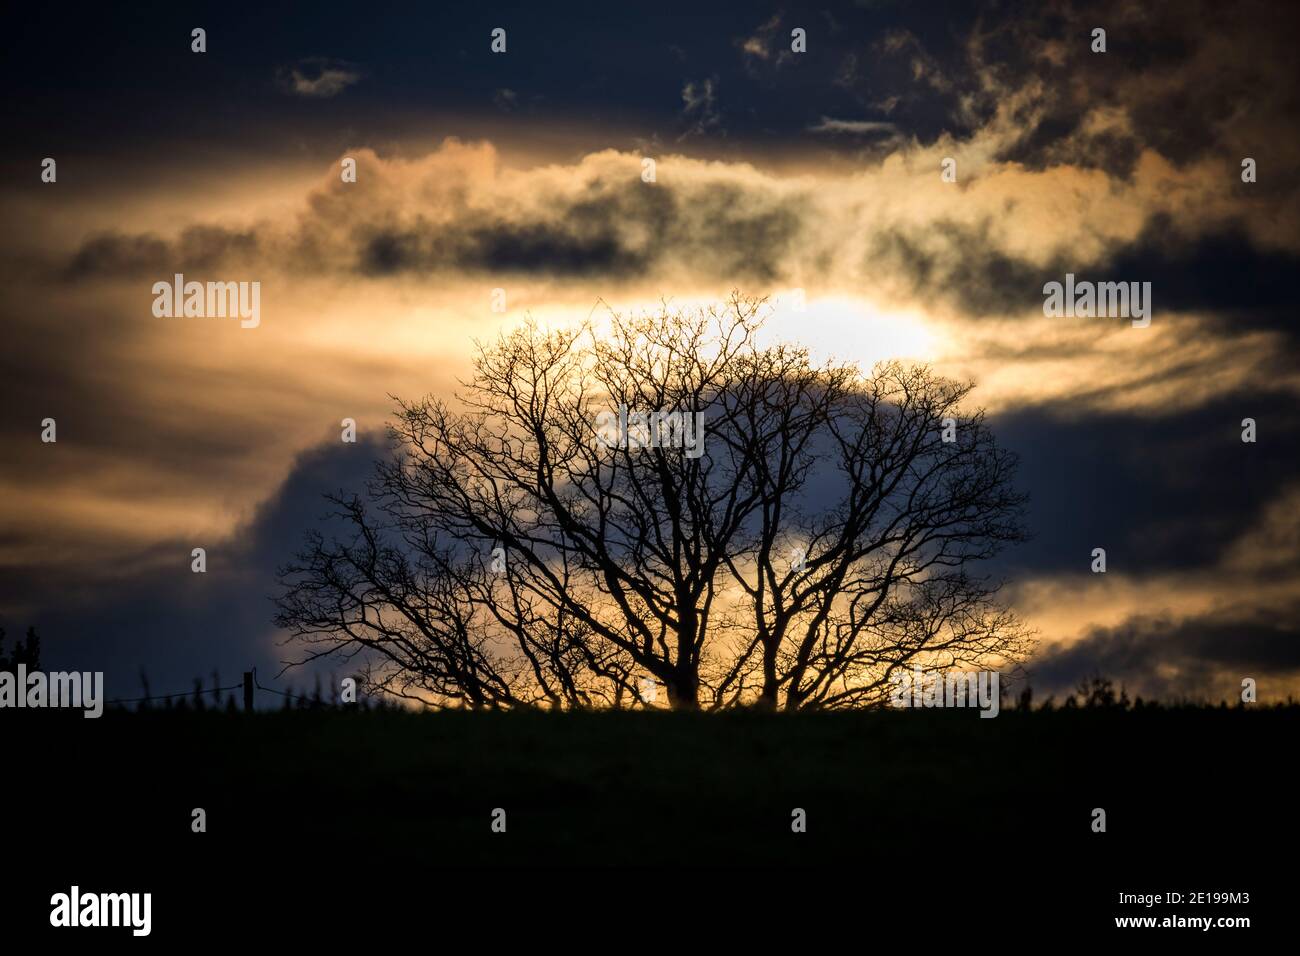 Dramatic sky over silhouetted tree in English countryside Stock Photo